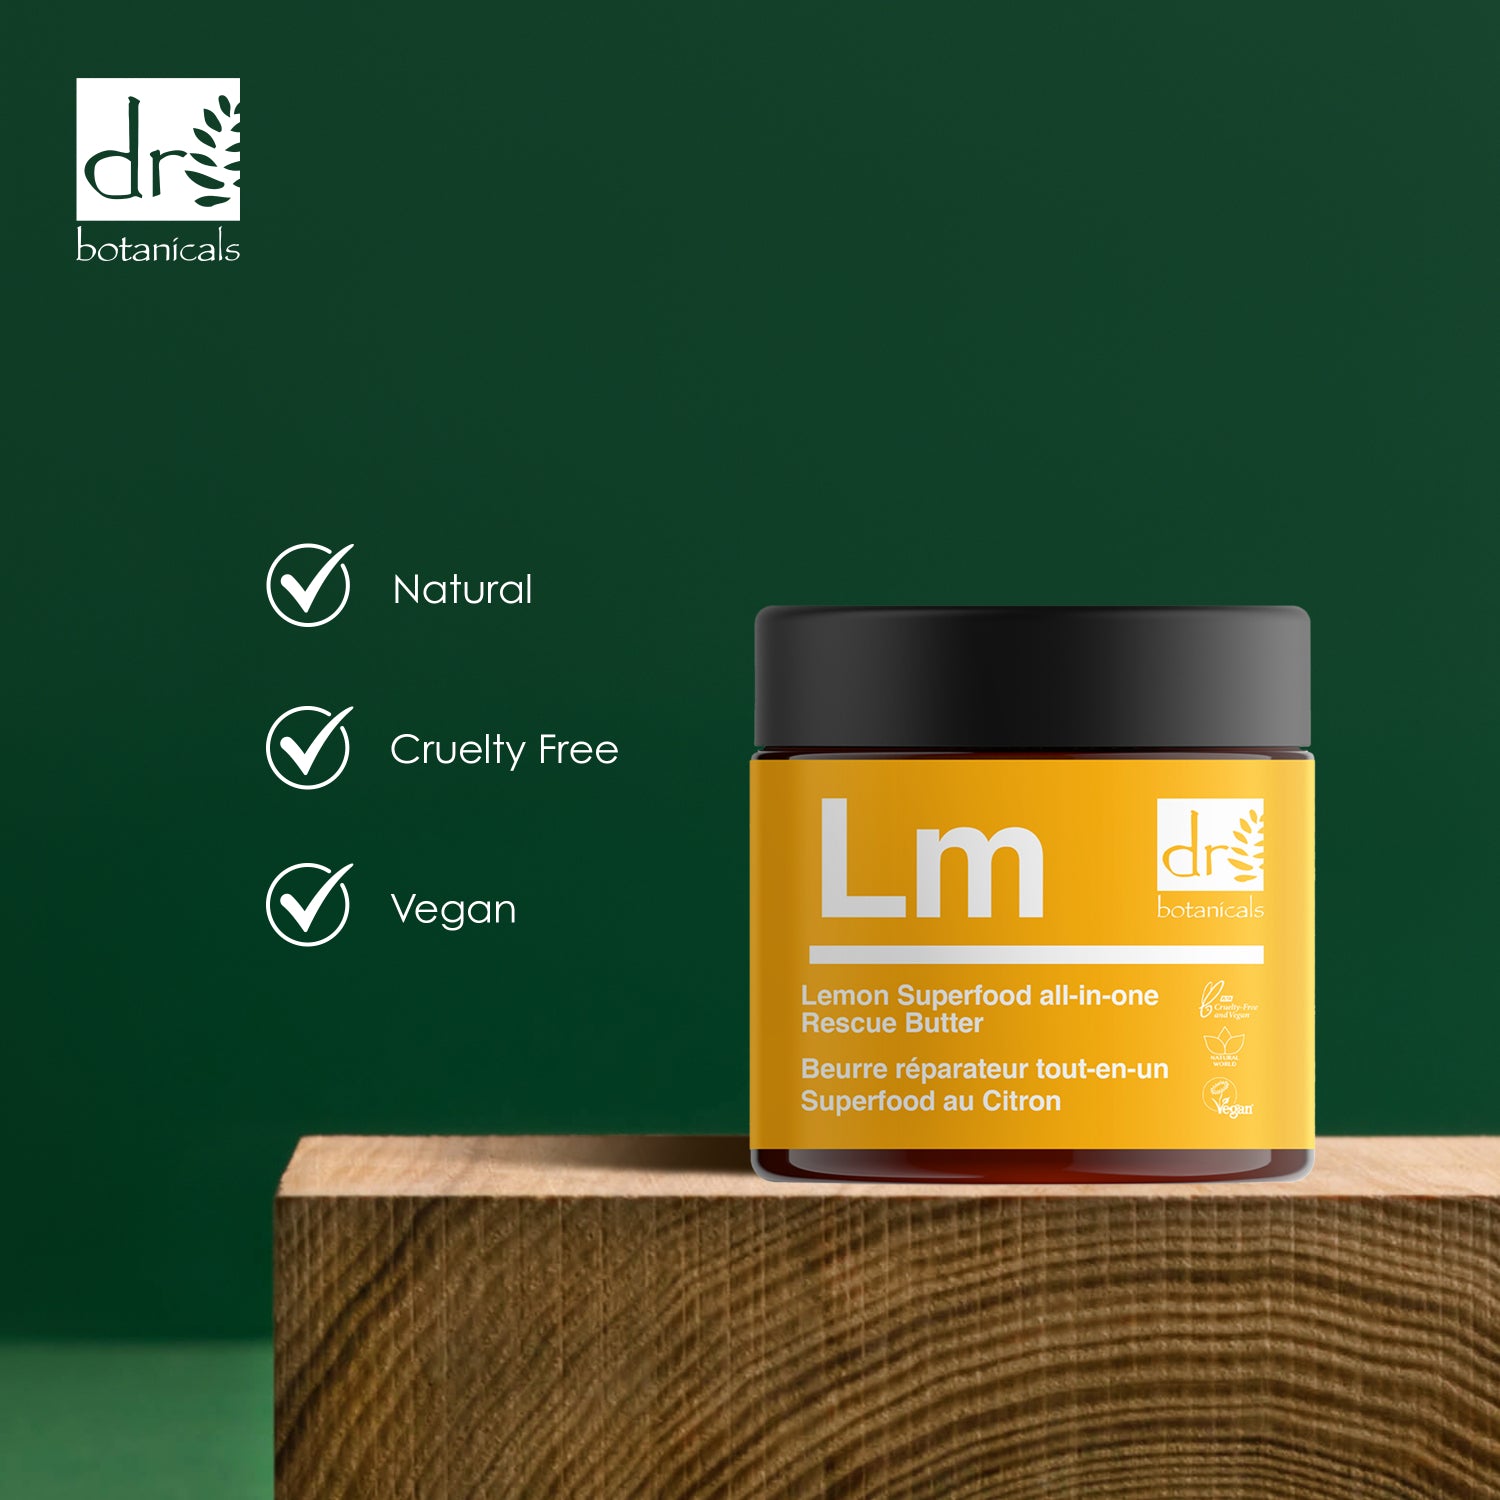 Lemon Superfood All-In-One Rescue Butter 60ml